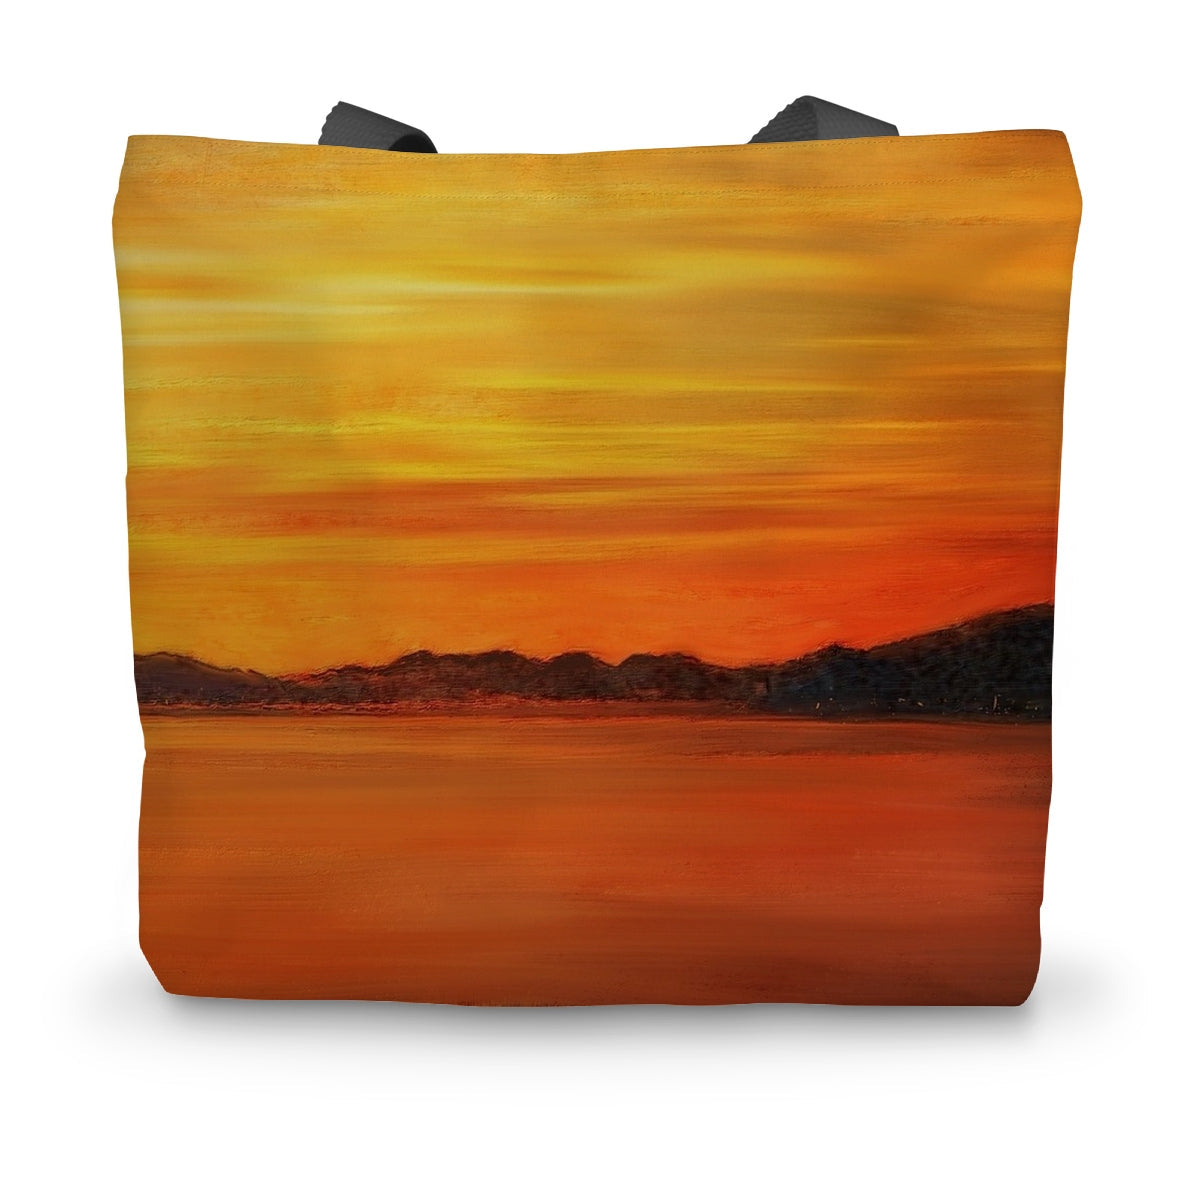 Loch Fyne Sunset Art Gifts Canvas Tote Bag-Bags-Scottish Lochs & Mountains Art Gallery-14"x18.5"-Paintings, Prints, Homeware, Art Gifts From Scotland By Scottish Artist Kevin Hunter